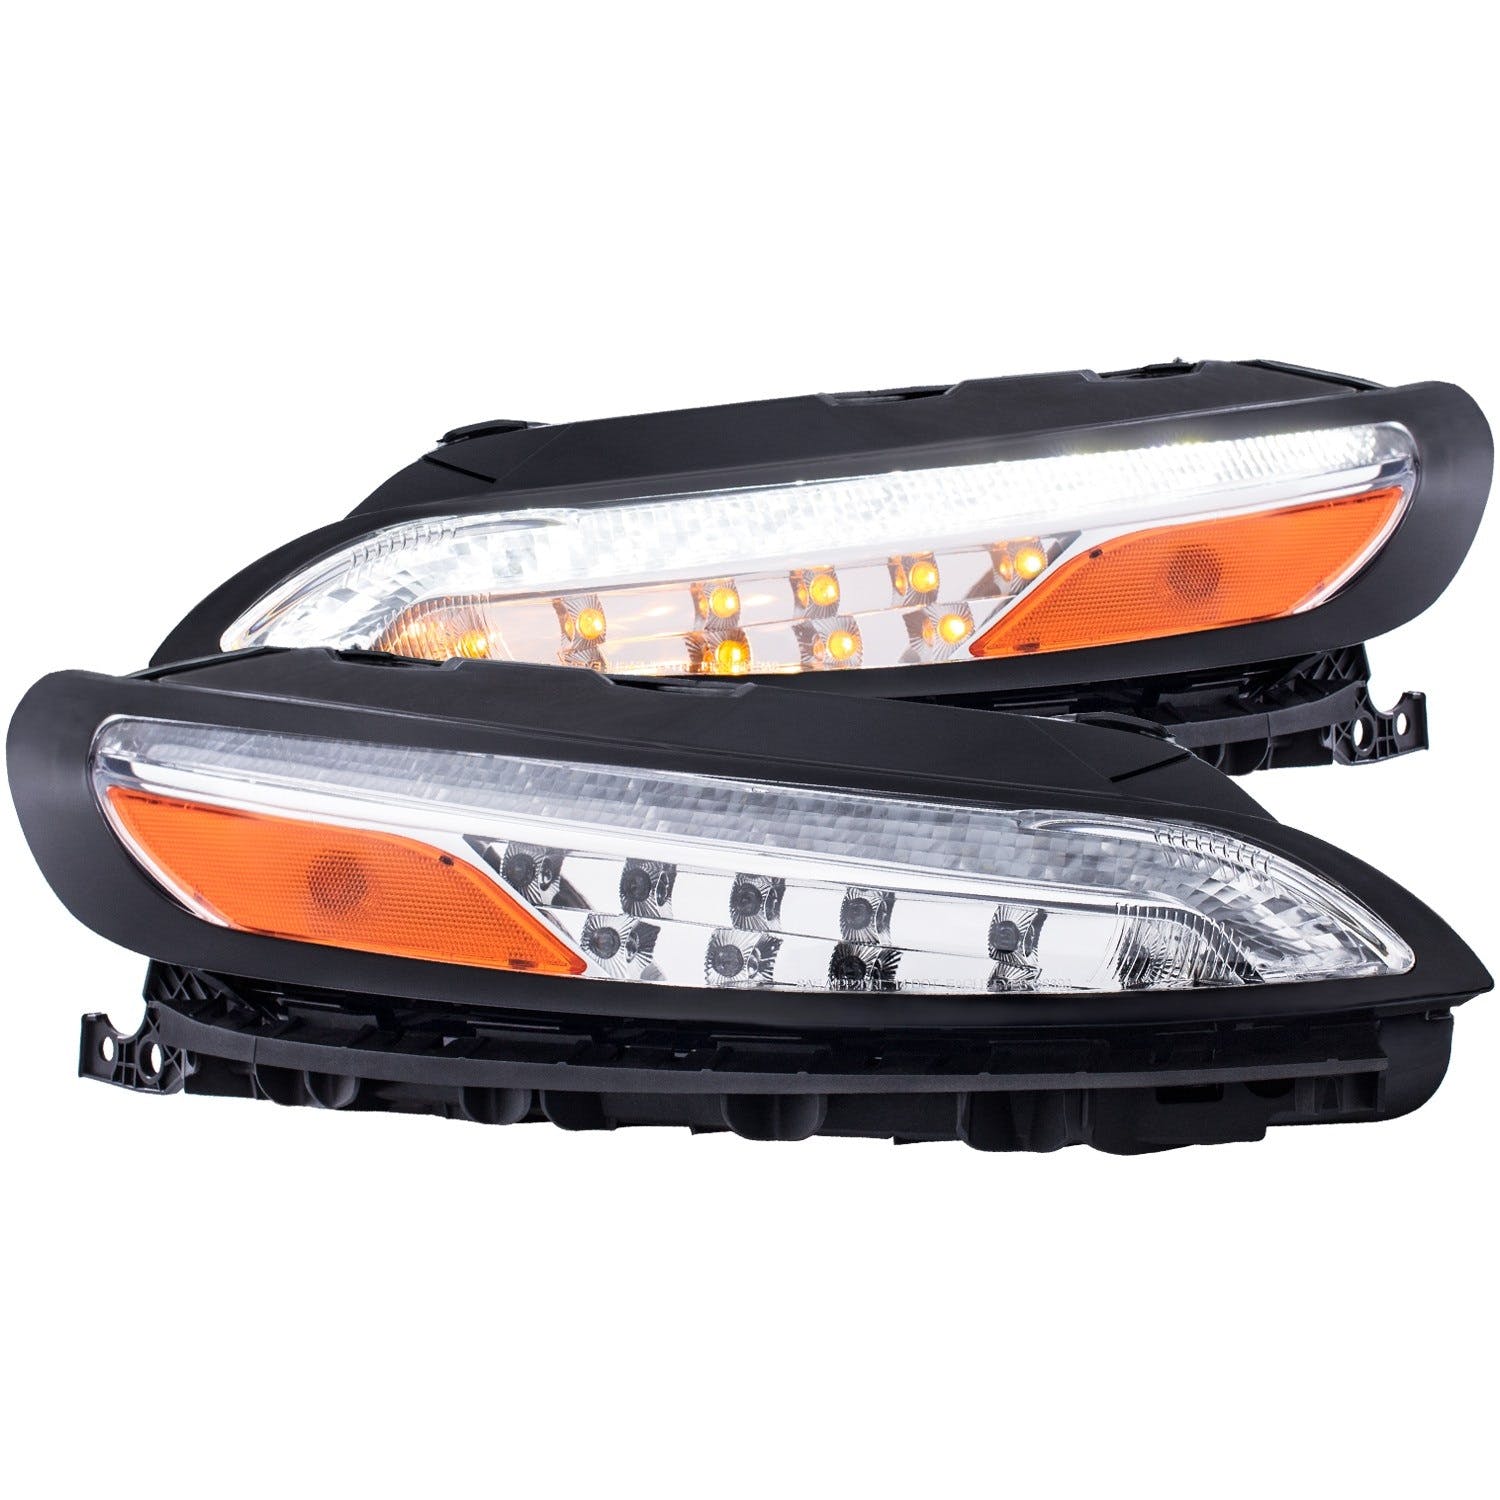 AnzoUSA 511081 LED Parking Lights Chrome with Amber Reflector